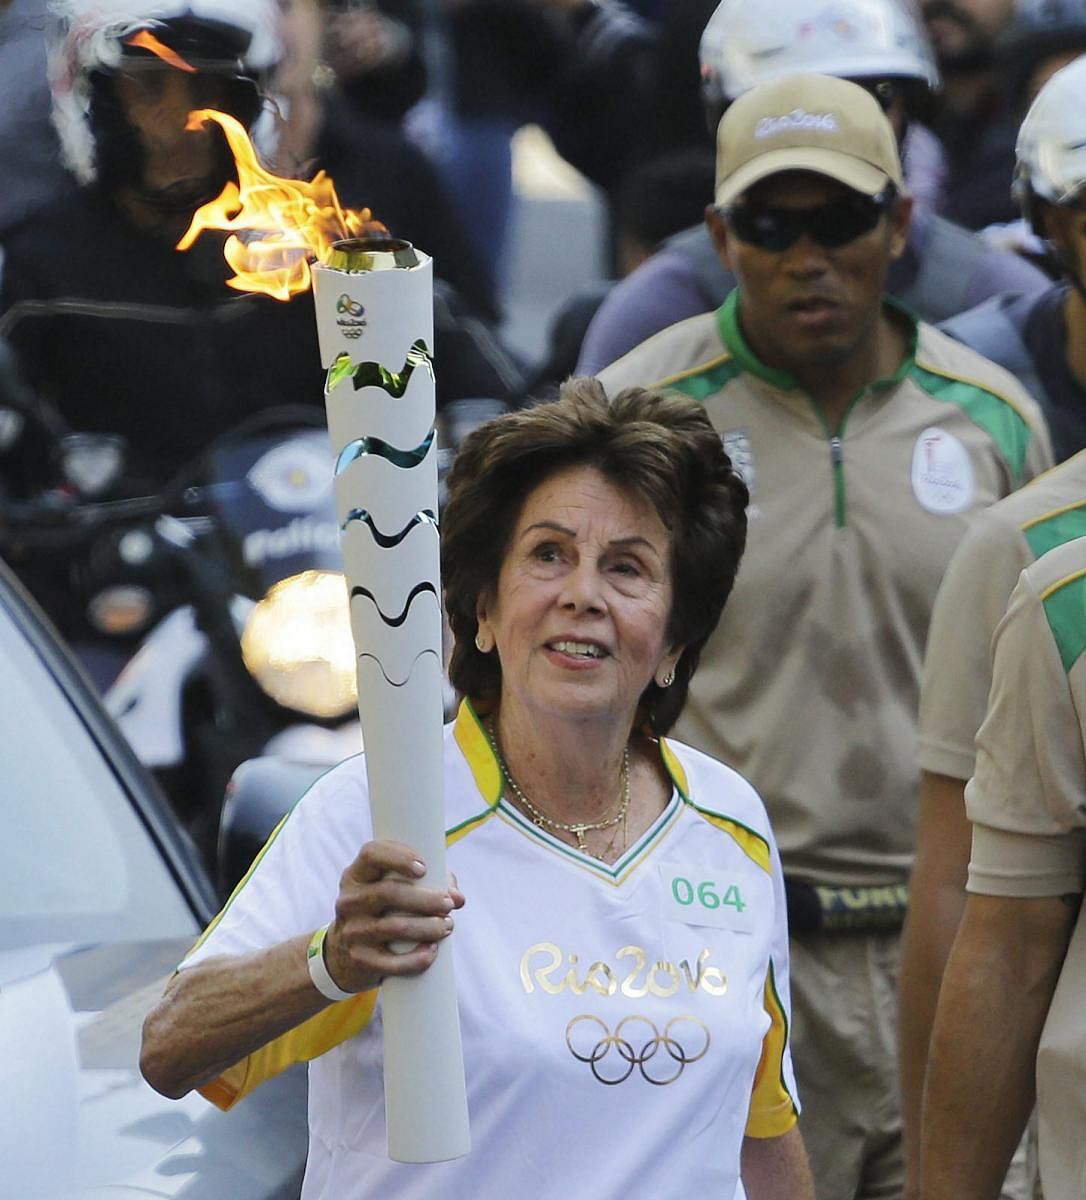 STYLE AND SUbSTANCE Maria Bueno with the Rio Olympic torch in Sao Paulo two years ago. Bueno, nicknamed ‘The Tennis Ballerina’, was one of the most elegant and successful players of her era. AP/ PTI